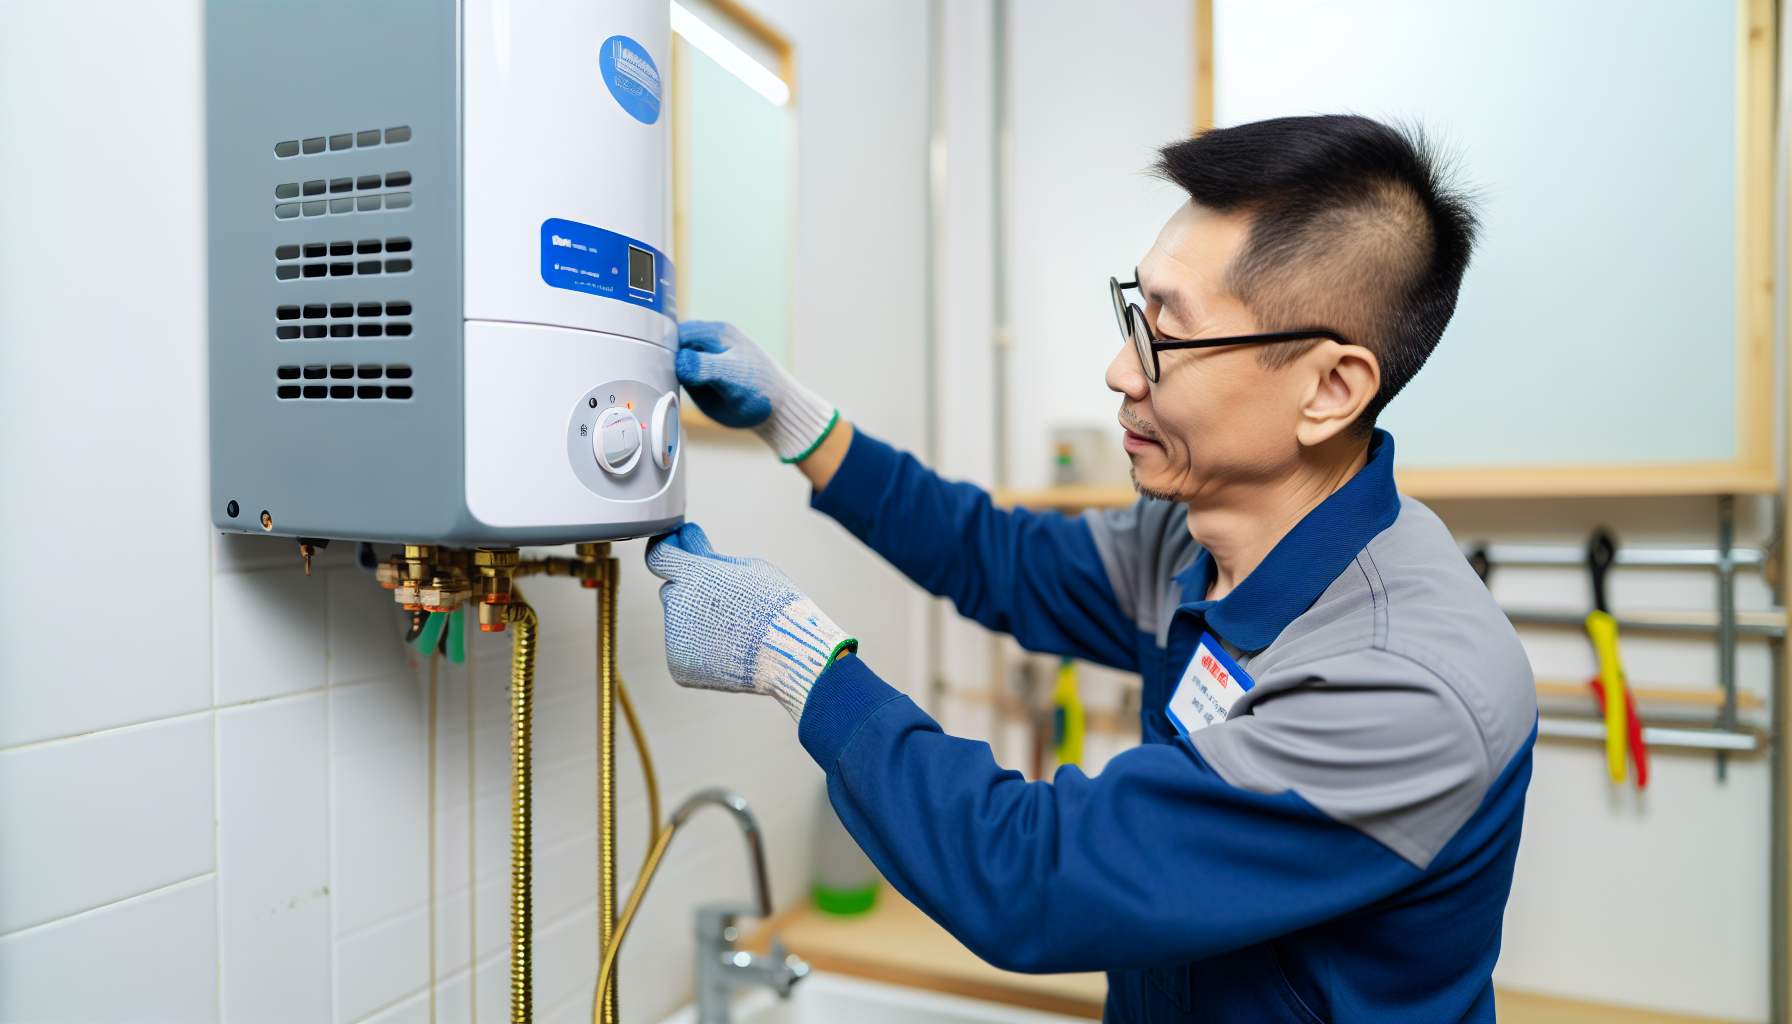 Professional installing an electric water heater